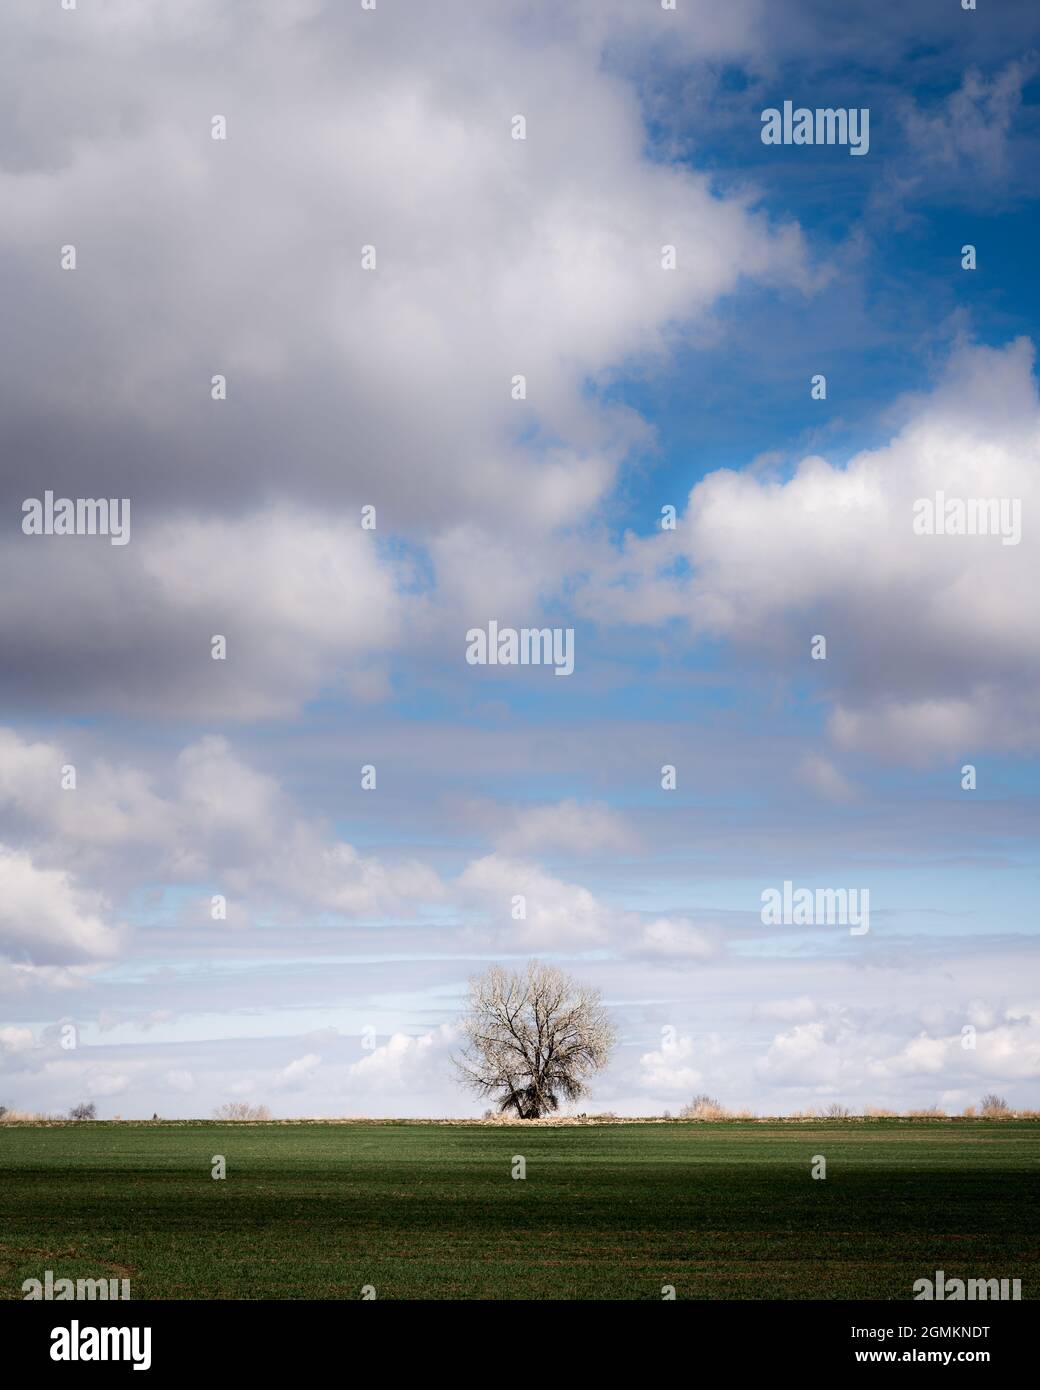 A lone tree in a field on the horizon with clouds in the sky Stock Photo